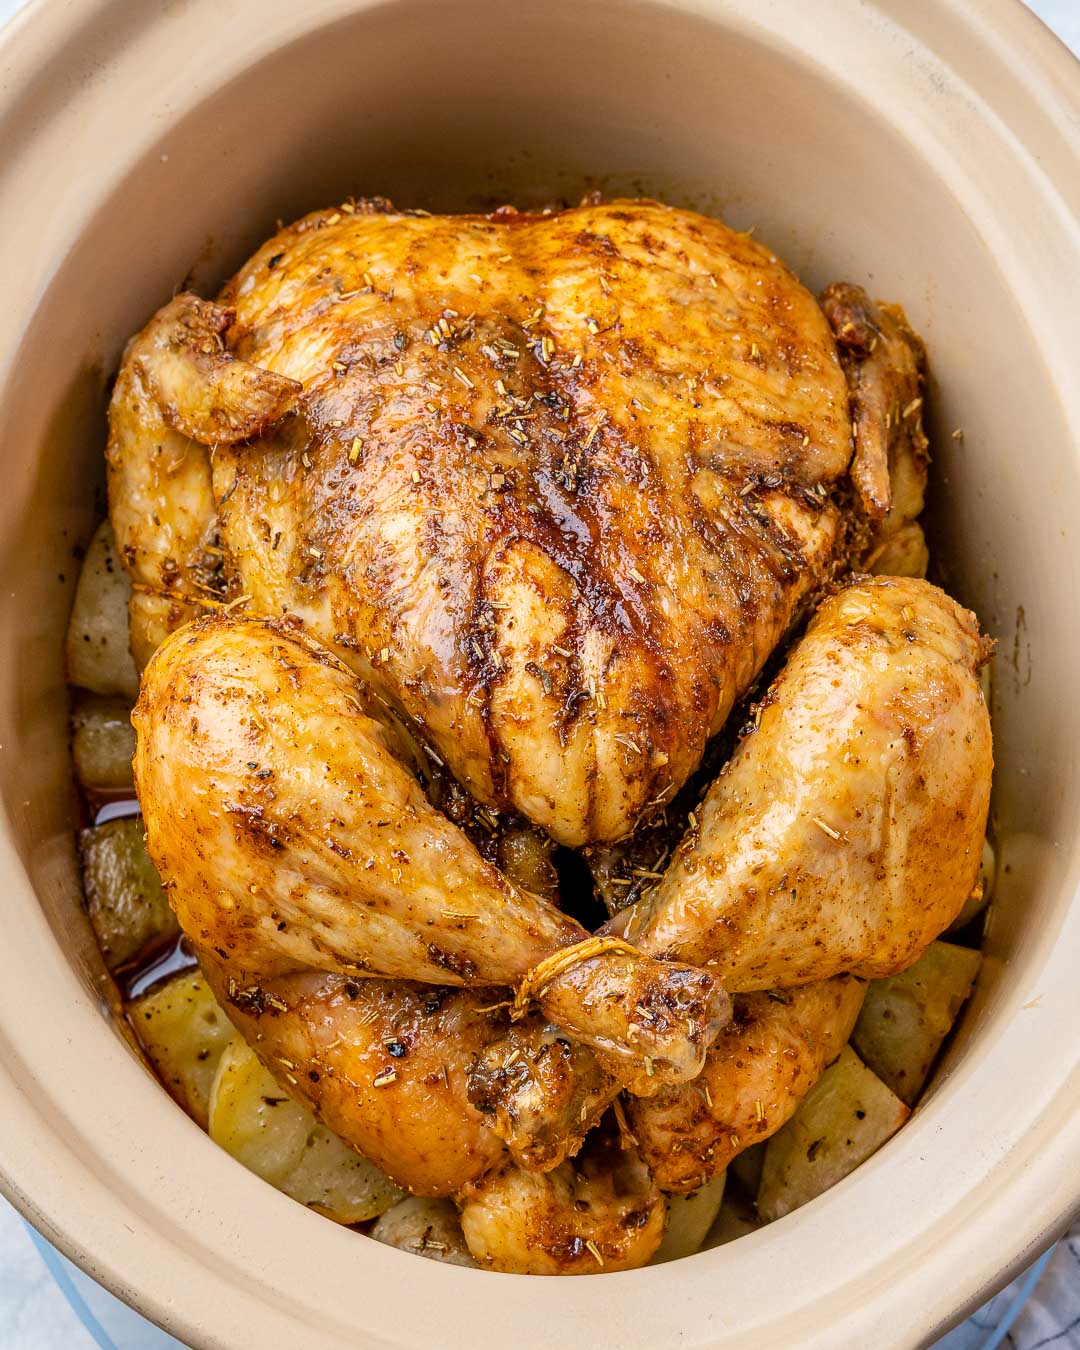 How to Make a Whole Chicken in a Slow Cooker